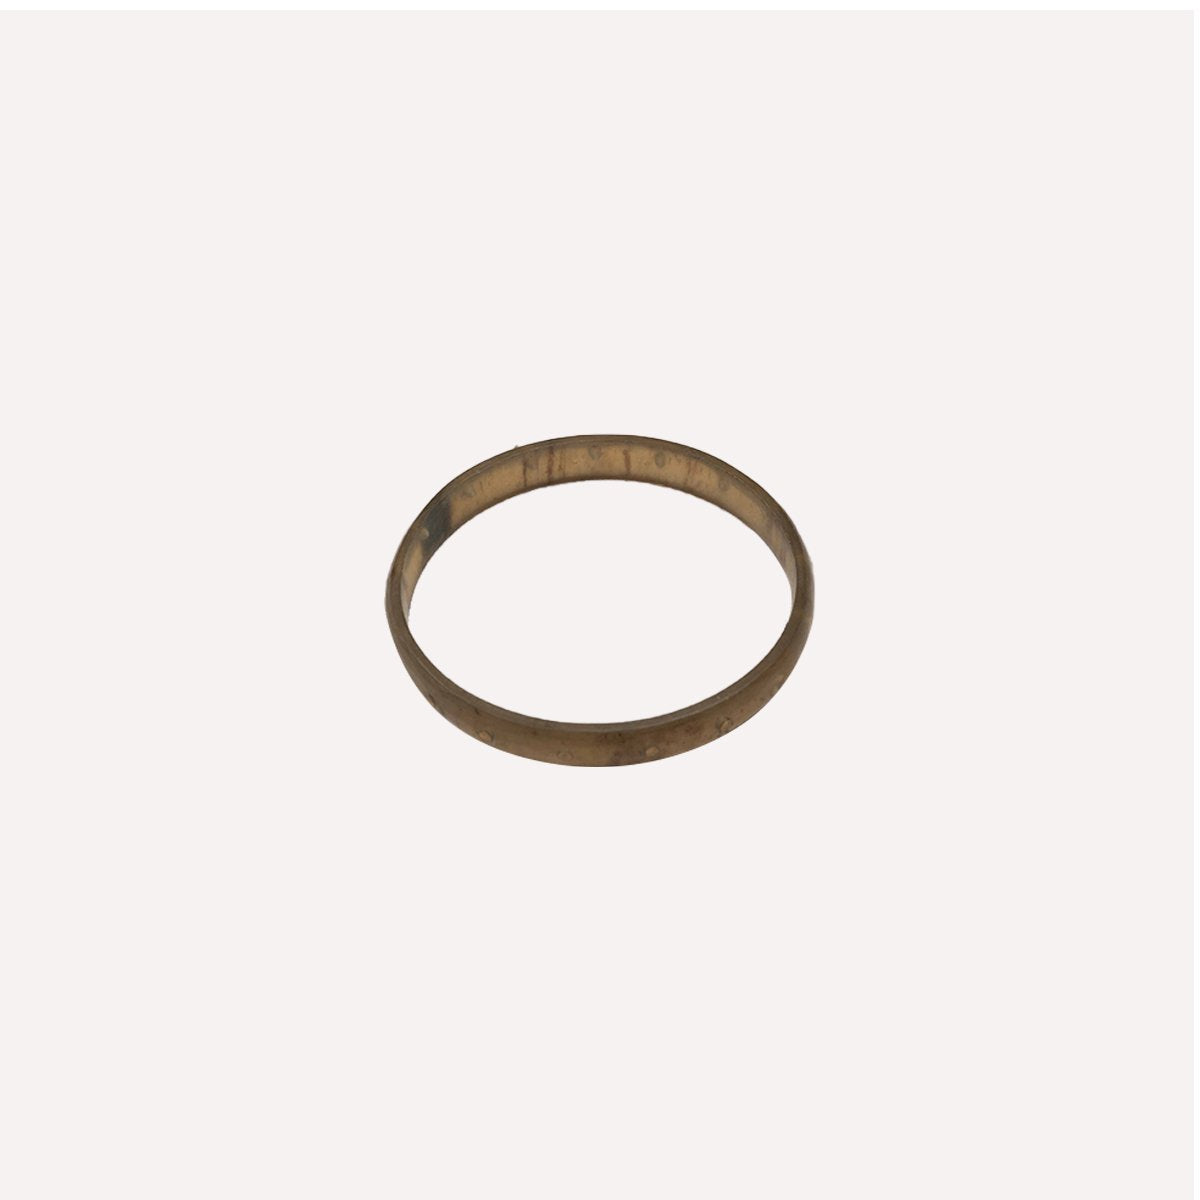 Minimalistic Bone African Bangle - Authentic African handicrafts | Clothing, bags, painting, toys & more - CULTURE HUB by Muthoni Unchained